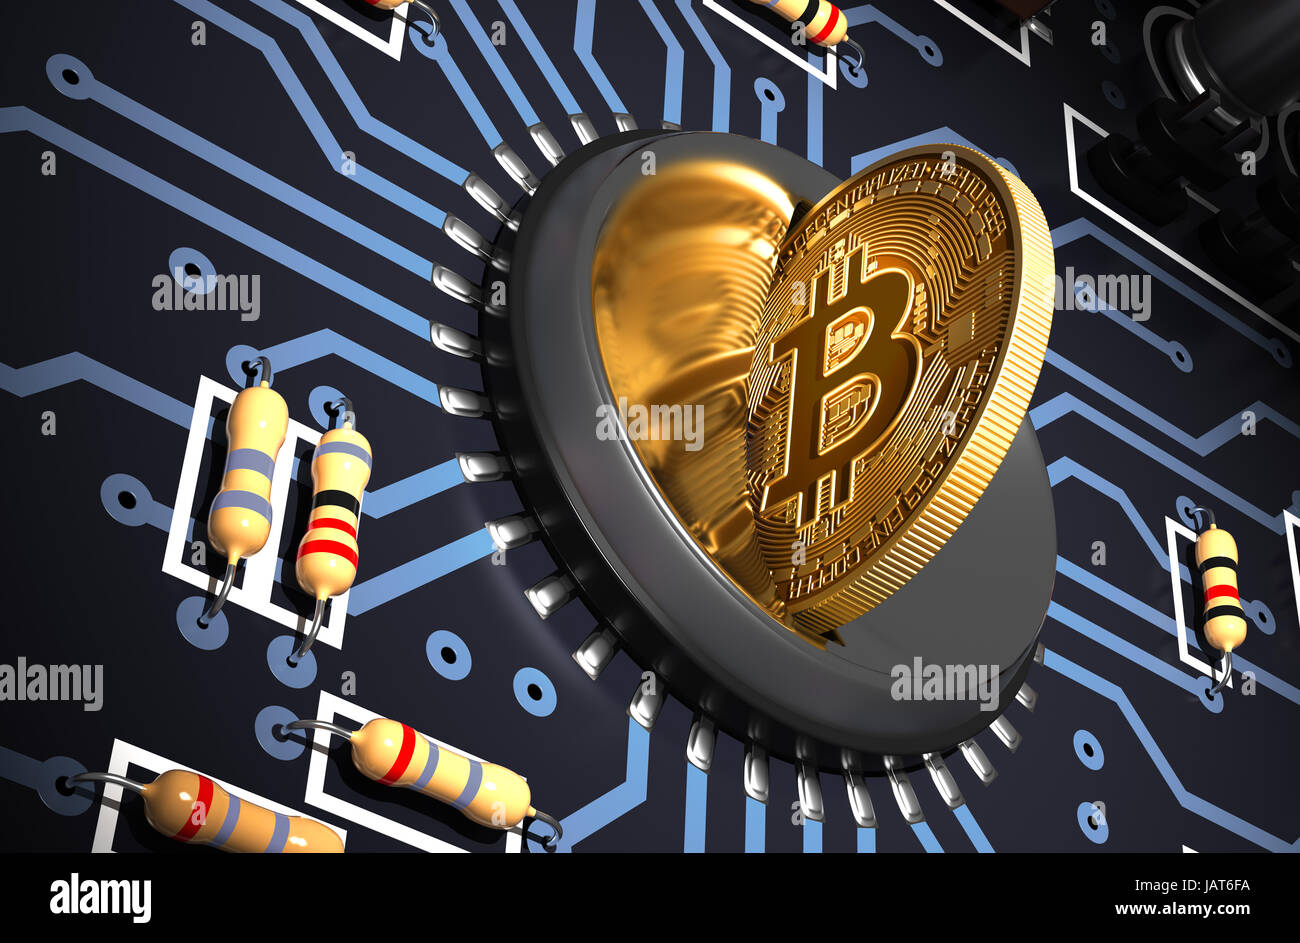 Putting Bitcoin Into Coin Slot On The Motherboard And Creating Heart Shape With Reflection. 3D Illustration. Stock Photo